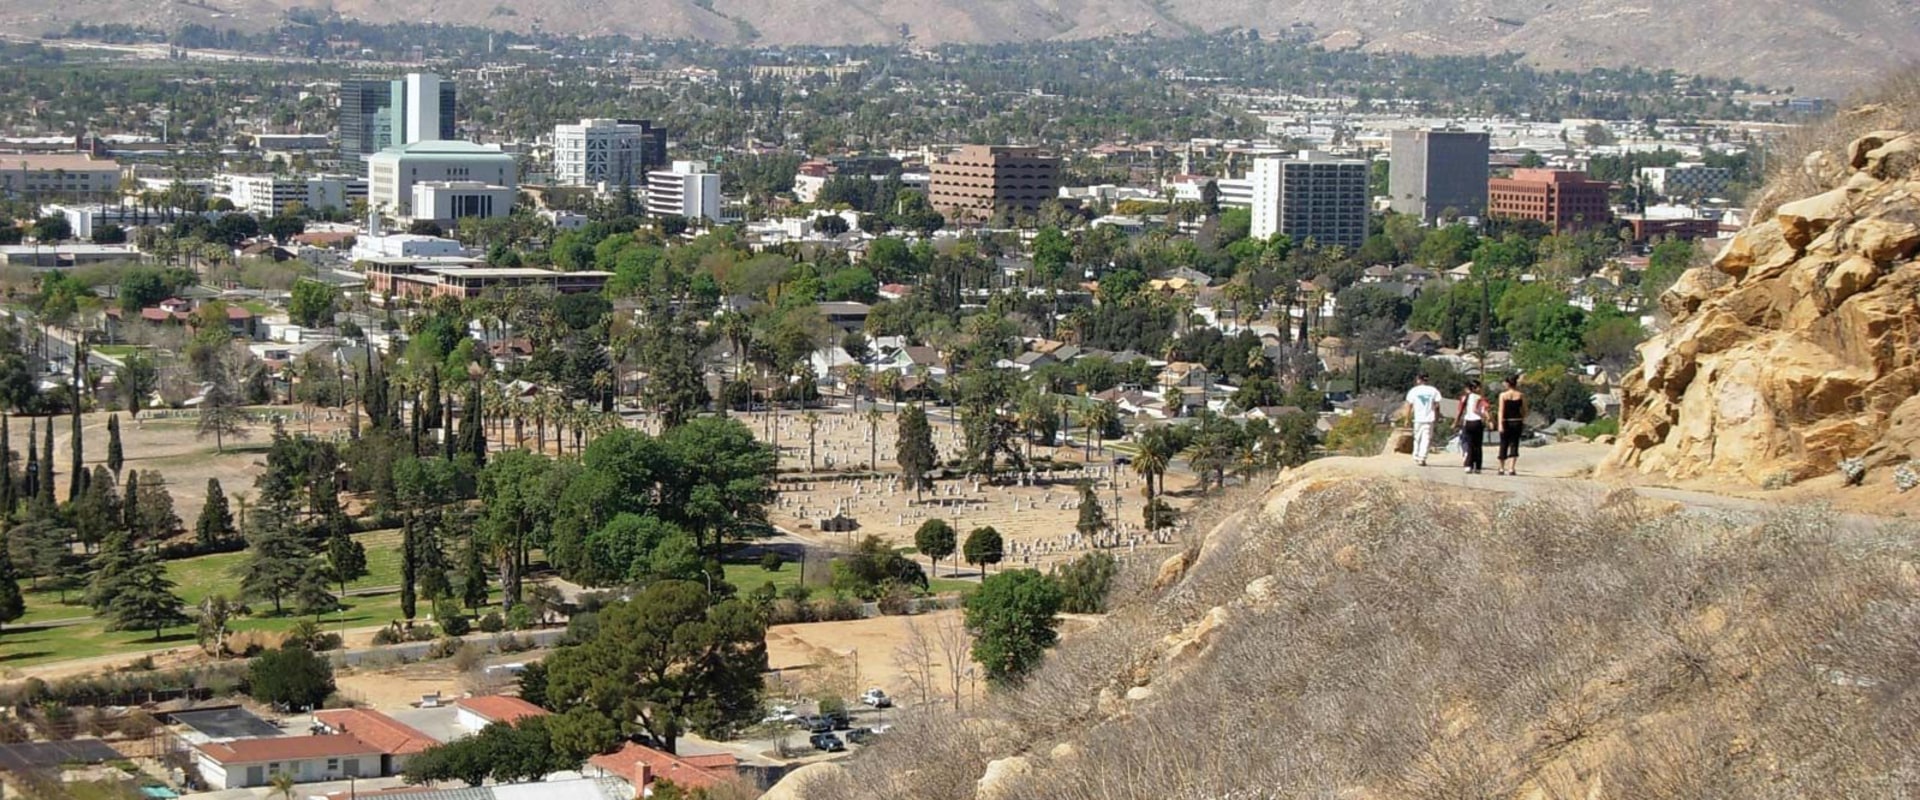 The Fascinating History of Riverside County: How Did It Get Its Name?